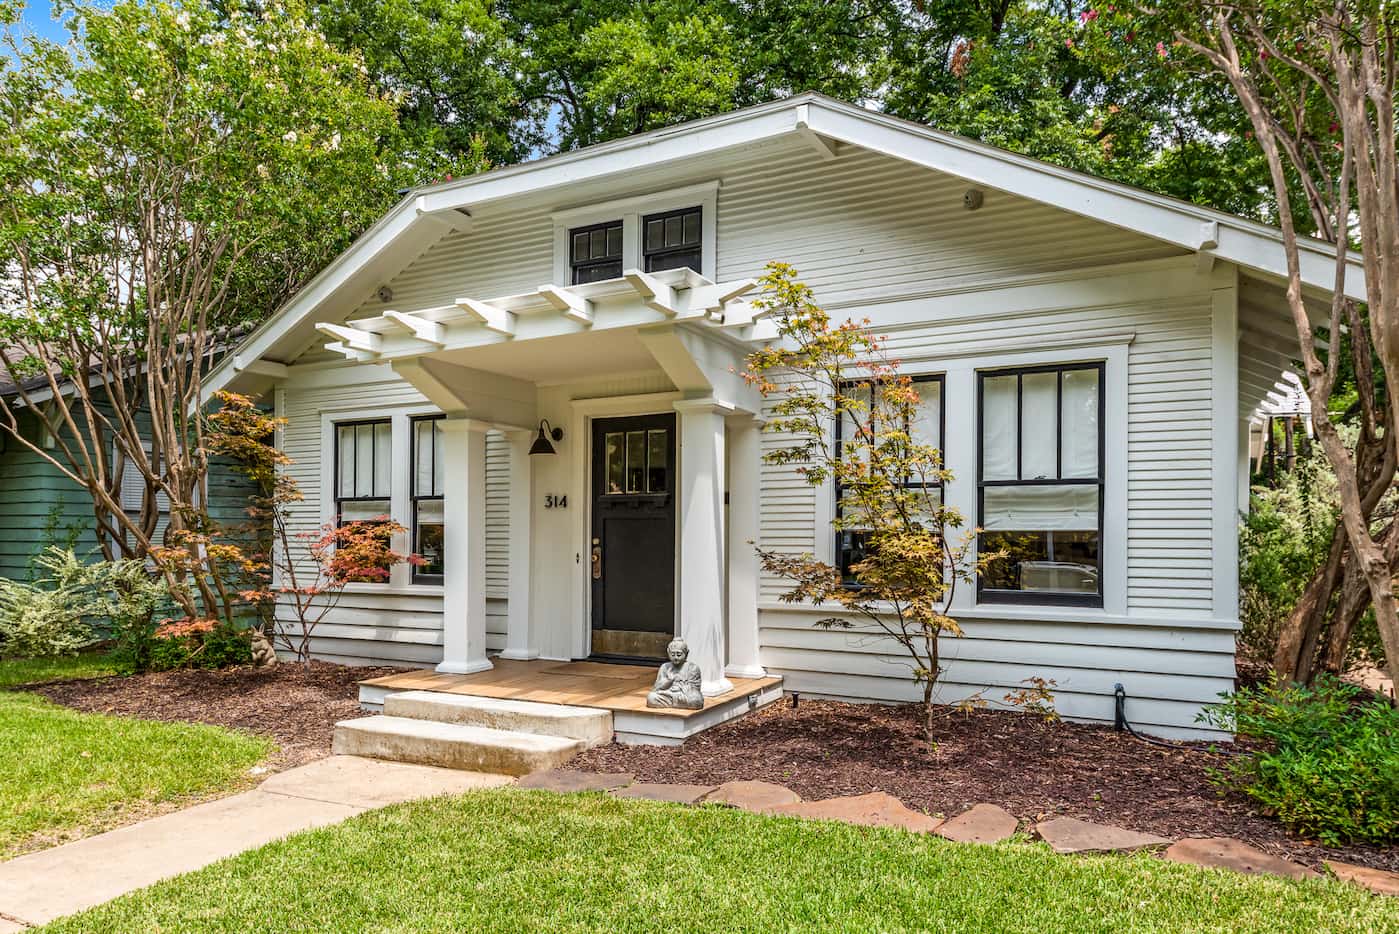 A look at 314 S. Montclair Avenue, one of the houses on the 2019 Heritage Oak Cliff Home Tour.